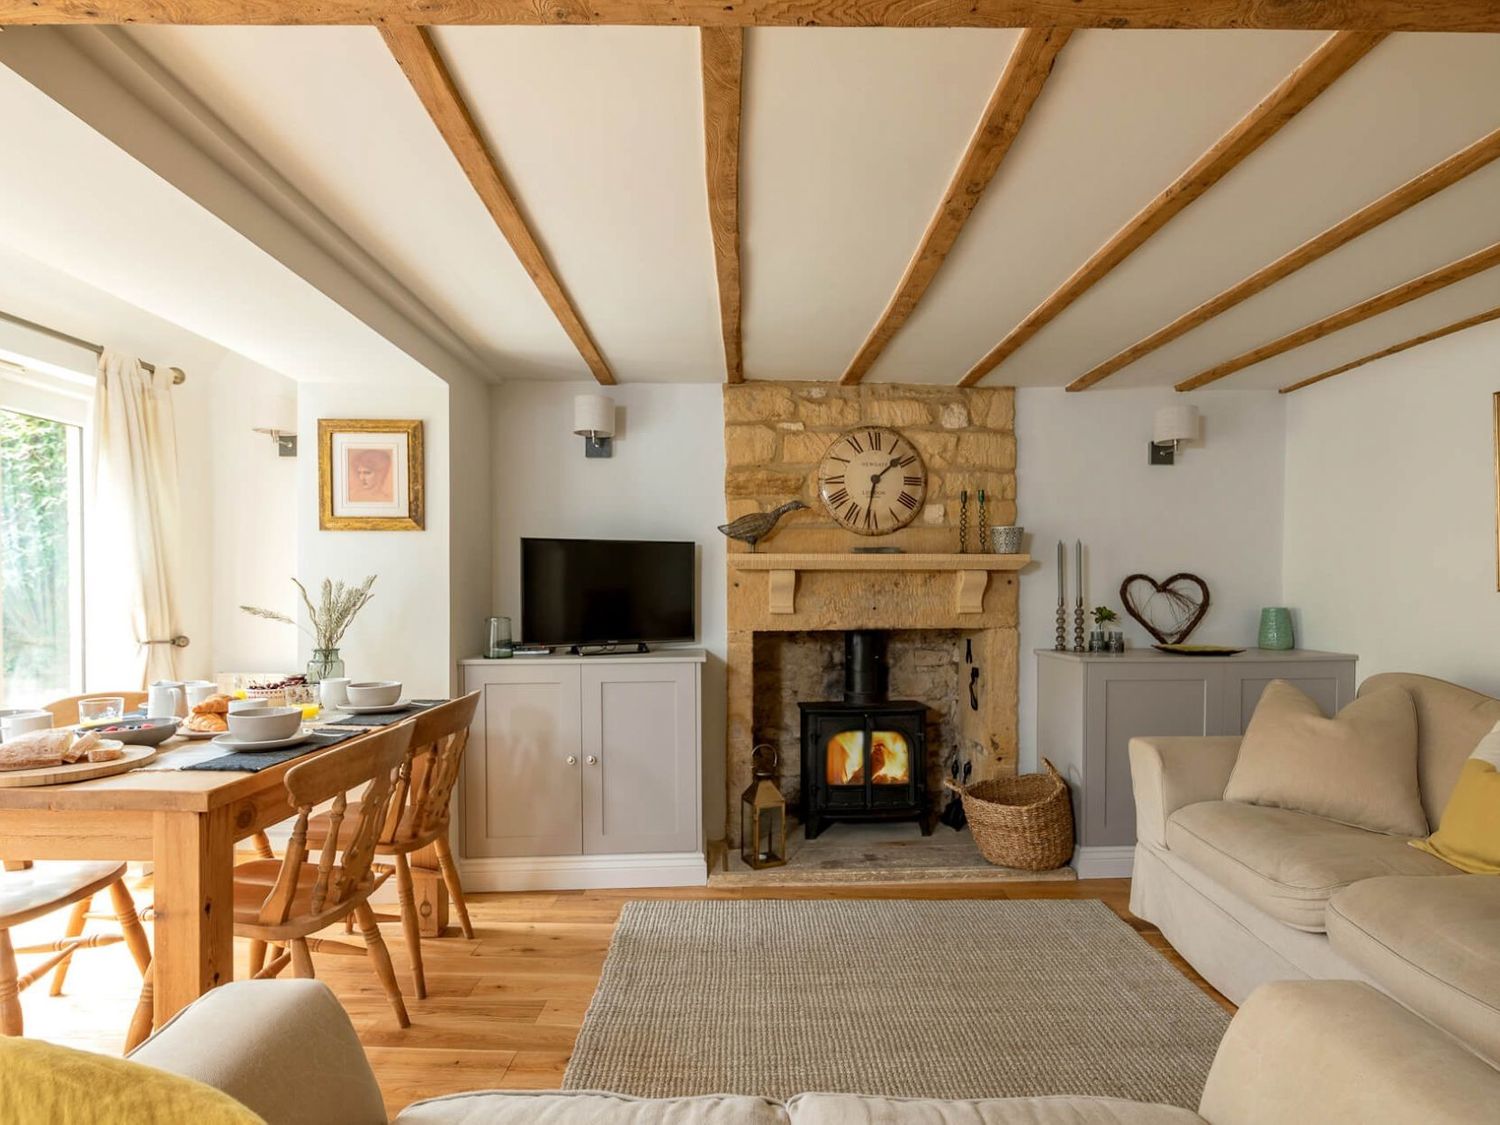 Meadow Brook Cottage - Cotswolds - 1091397 - photo 1